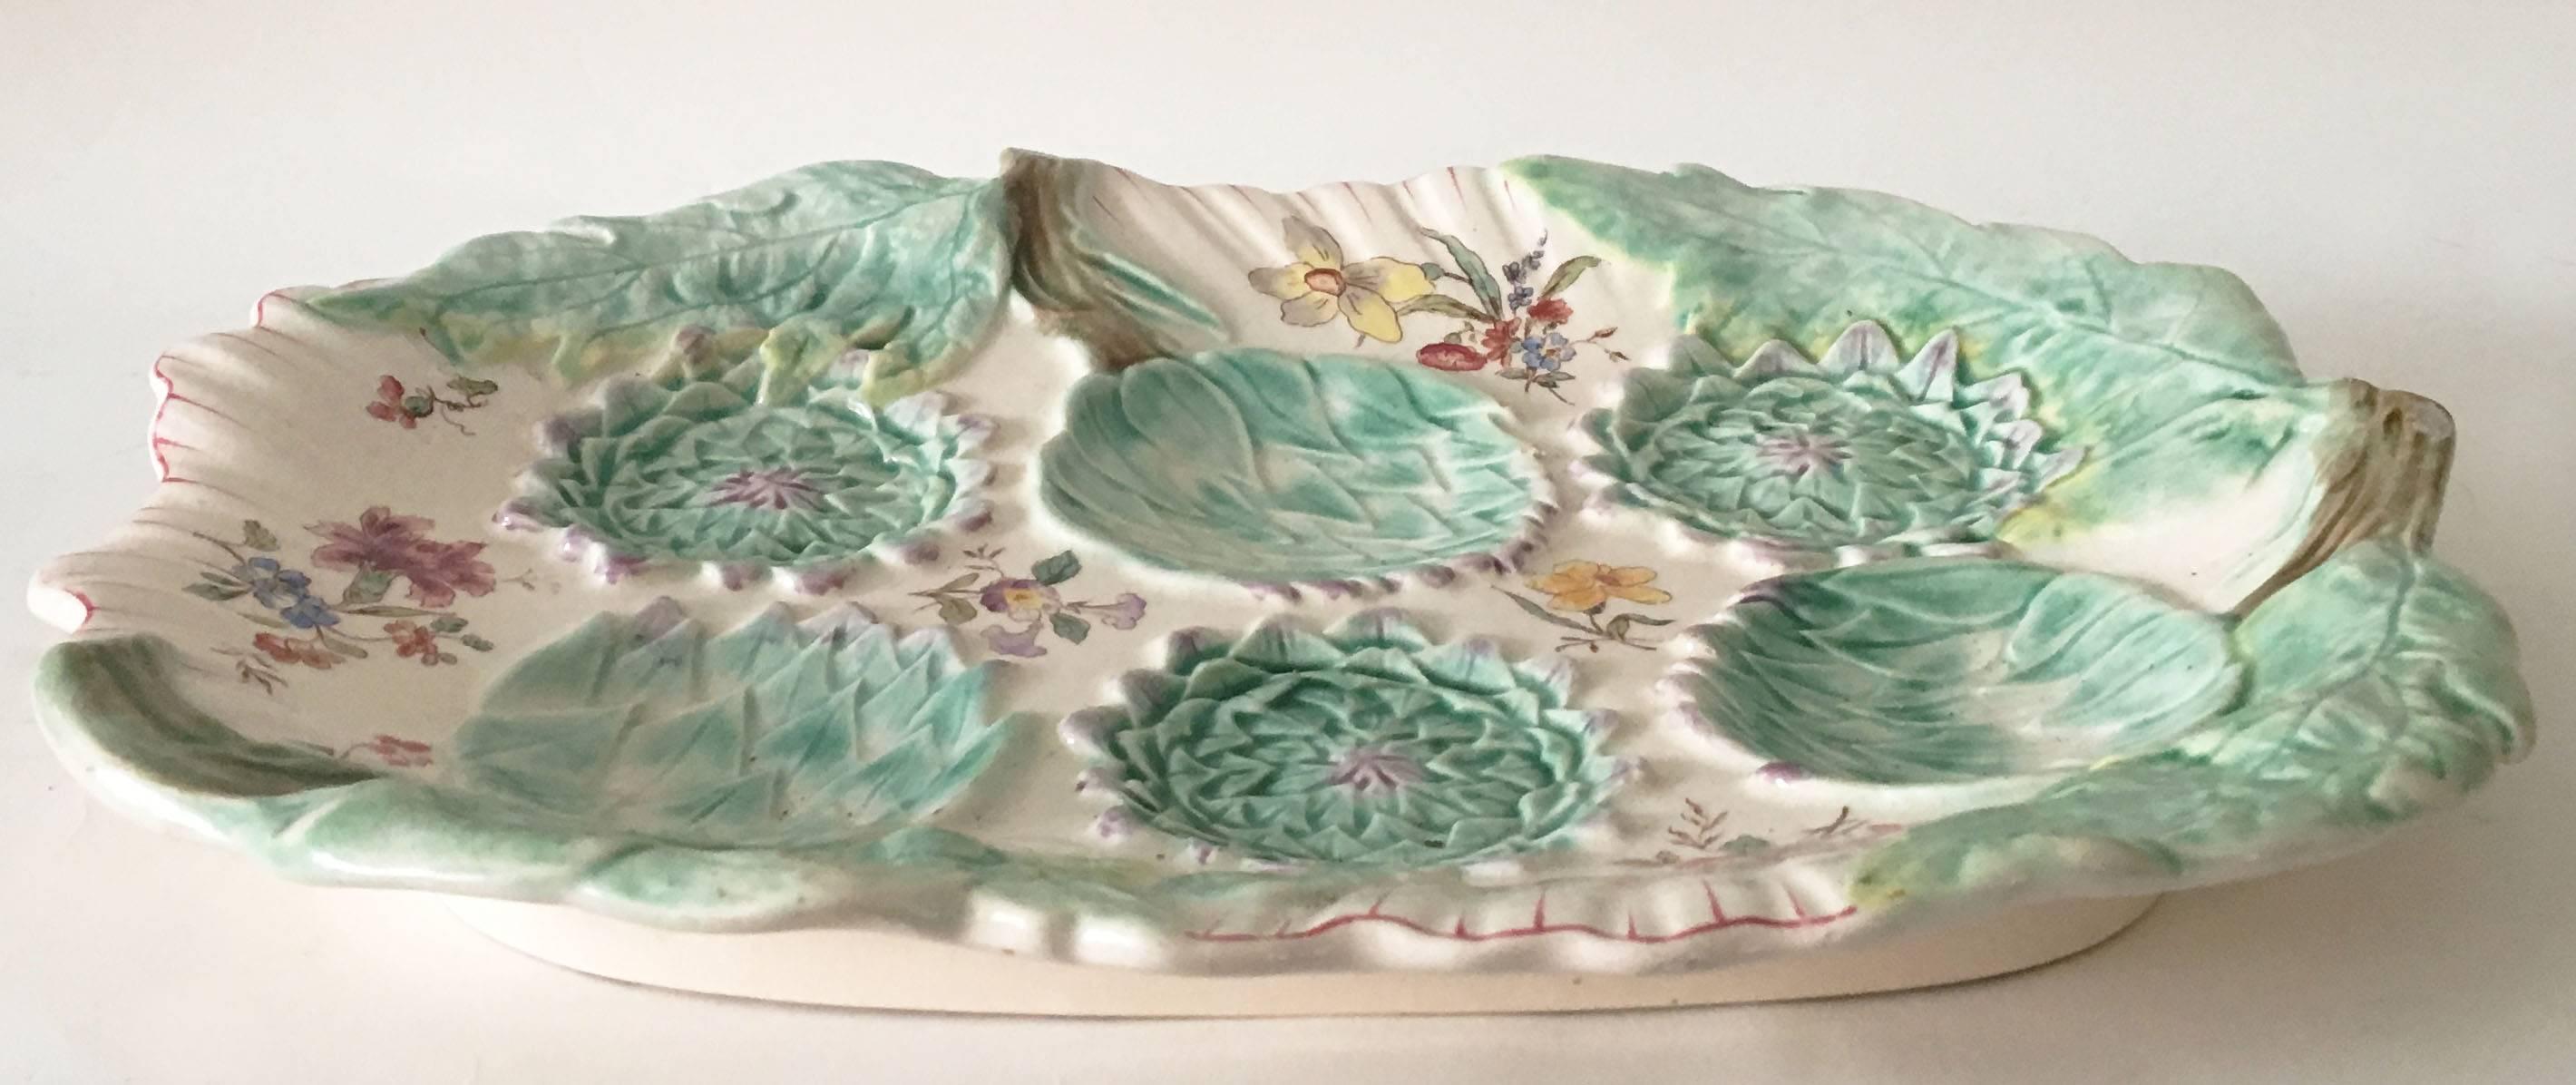 Very rare 19th century large Majolica artichoke platter signed Longchamp.
The platter is decorated with large artichoke leaves and six artichoke spaces, on all the platter painted flowers.
Chip on the back, minors wears.